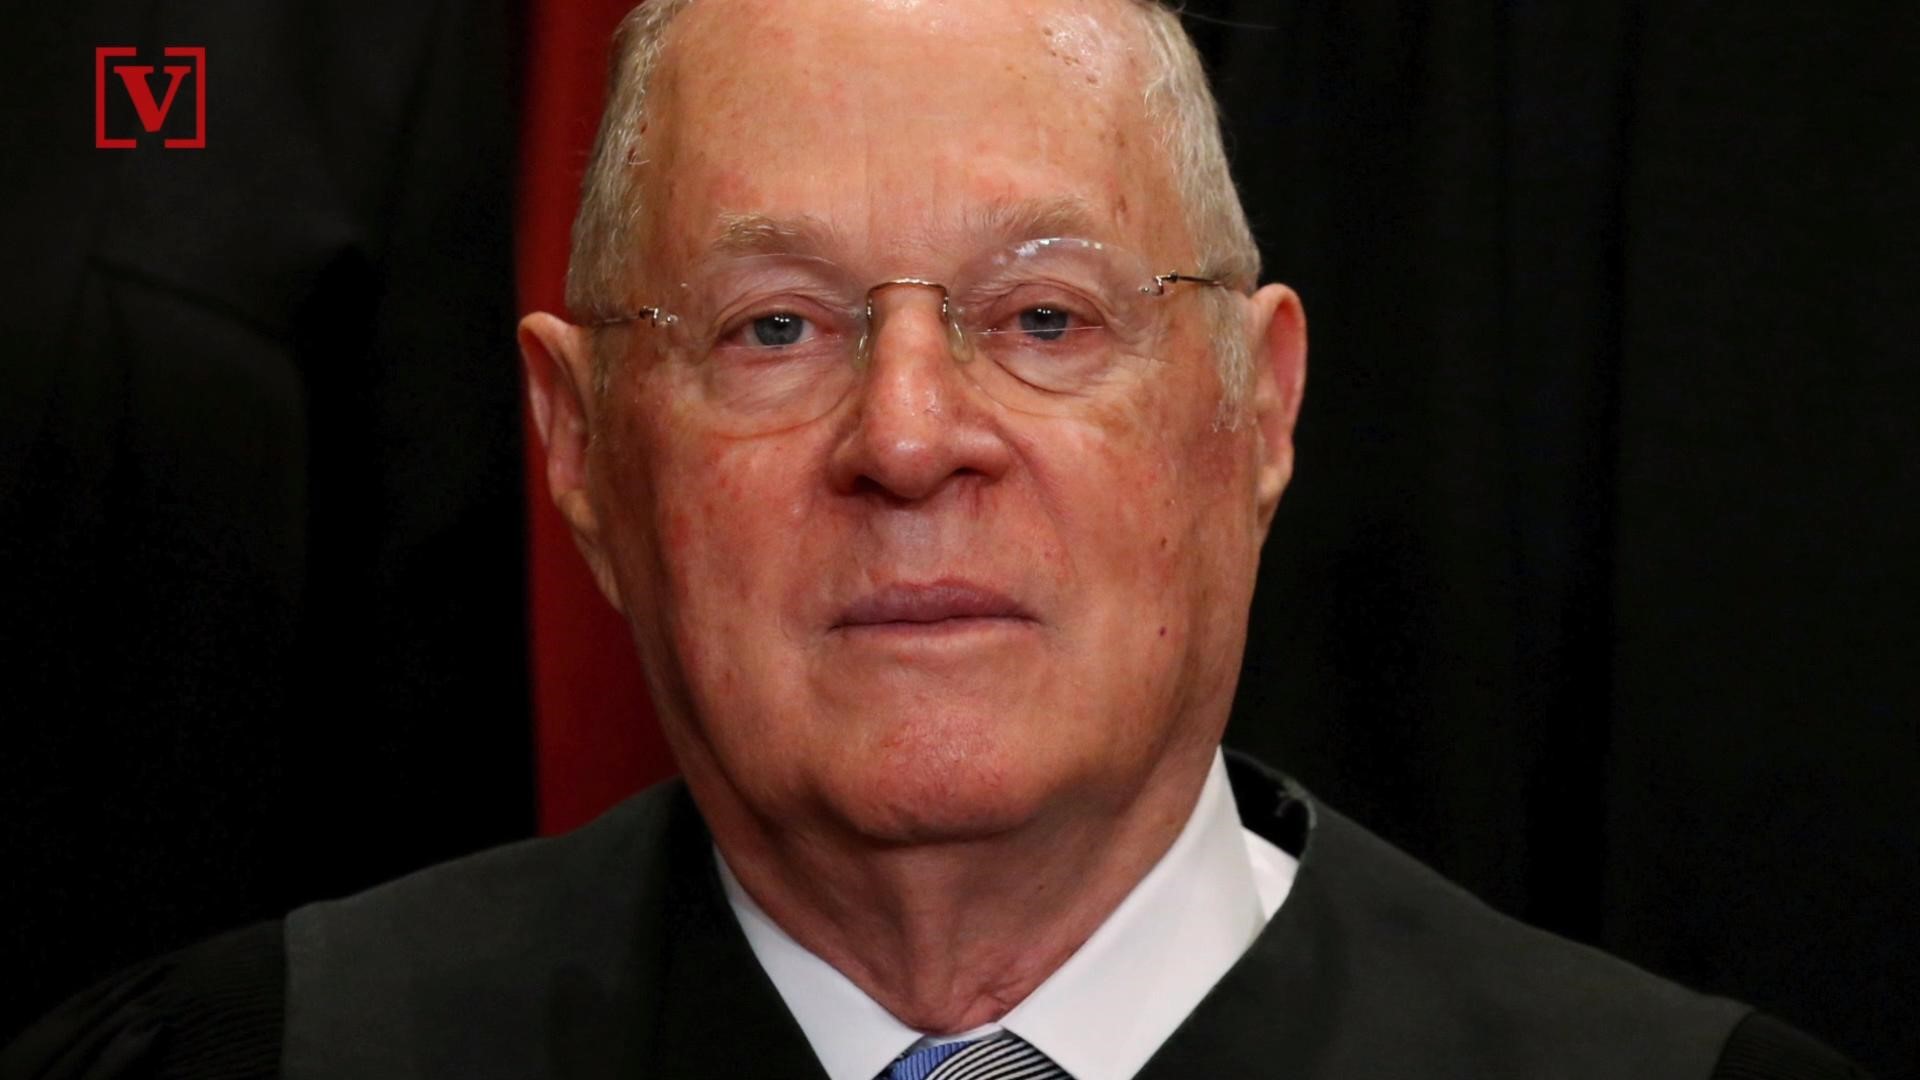 Supreme Court Justice Anthony Kennedy is retiring, giving President Donald Trump the chance to elect another conservative justice, the AP reports. Veuer's Sam Berman has the full story.